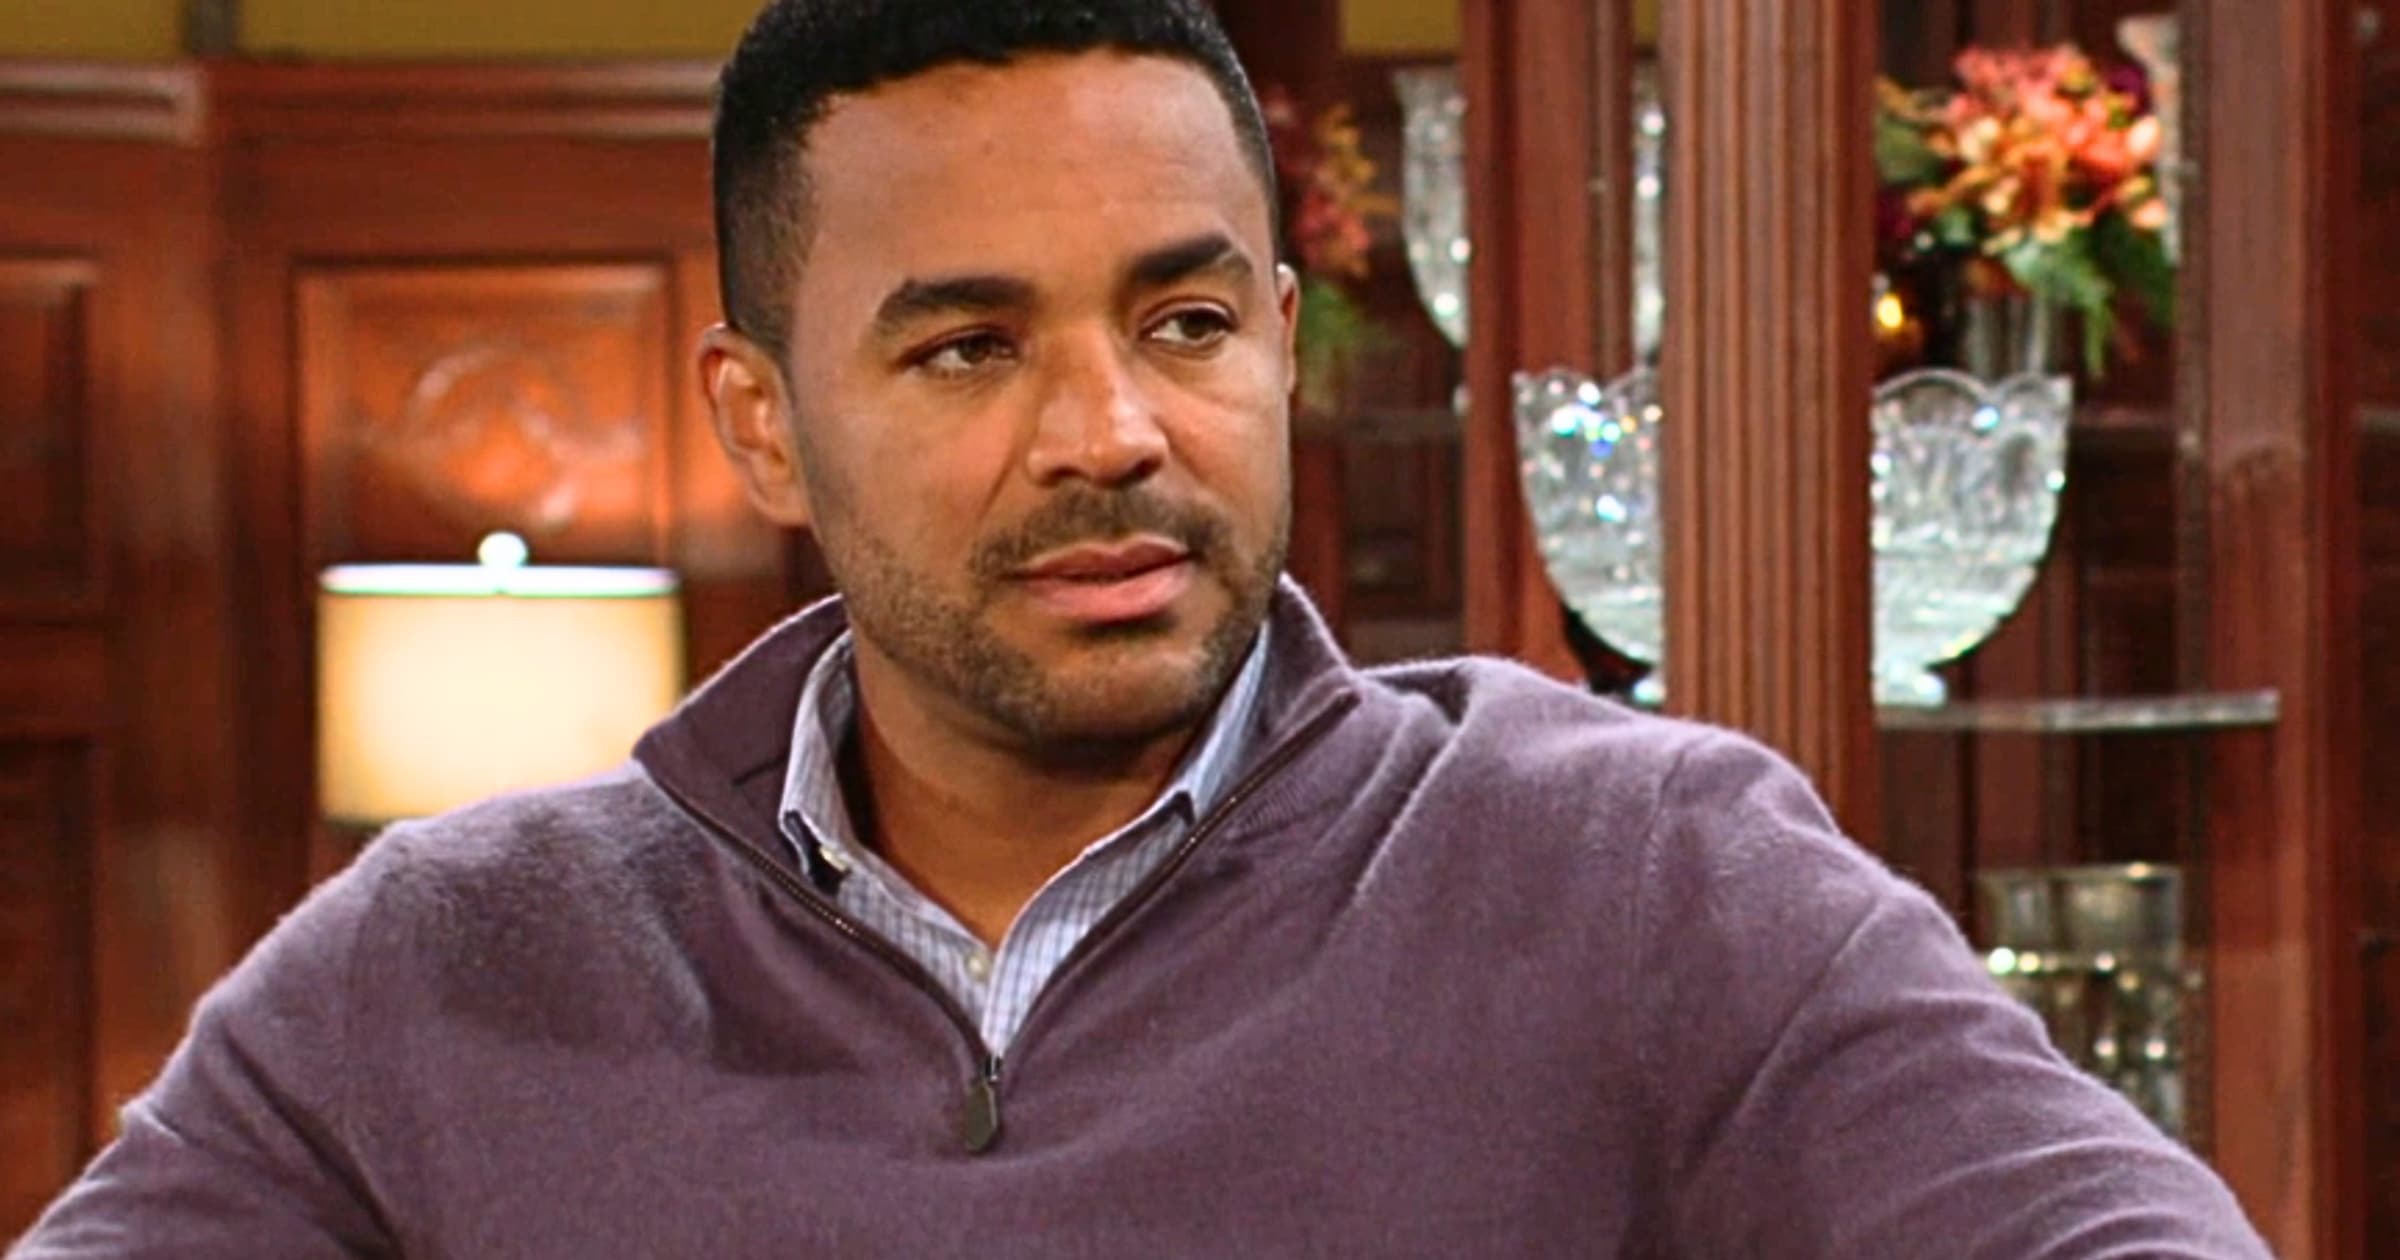 The Young and the Restless - Dec 5 - Nate